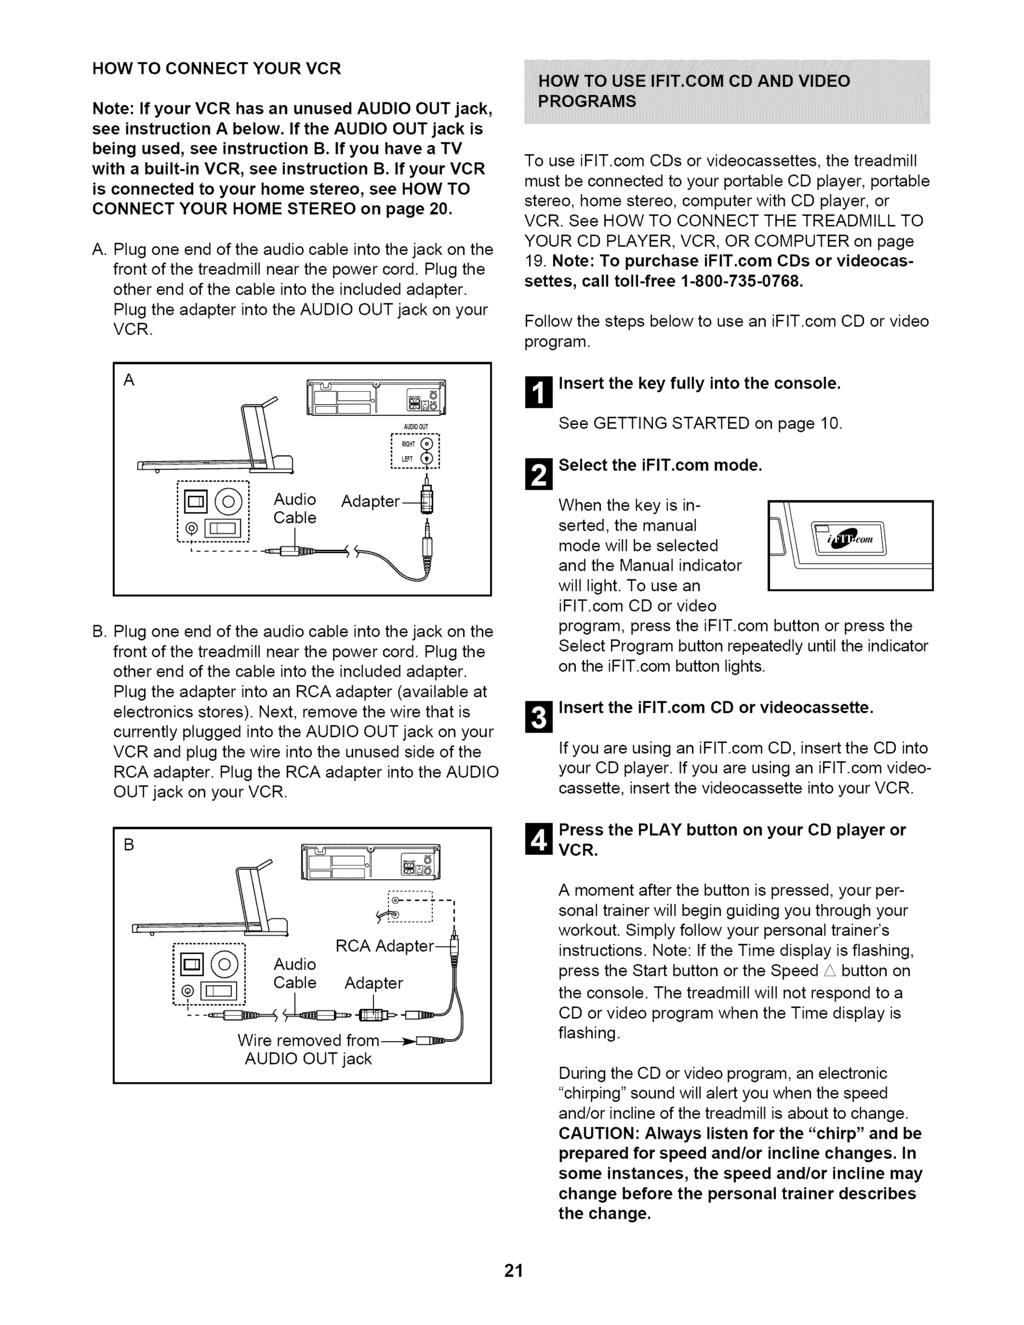 HOW TO CONNECT YOUR VCR Nte: If yur VCR has an unused AUDIO OUT jack, see instructin A belw. If the AUDIO OUT jack is being used, see instructin B.